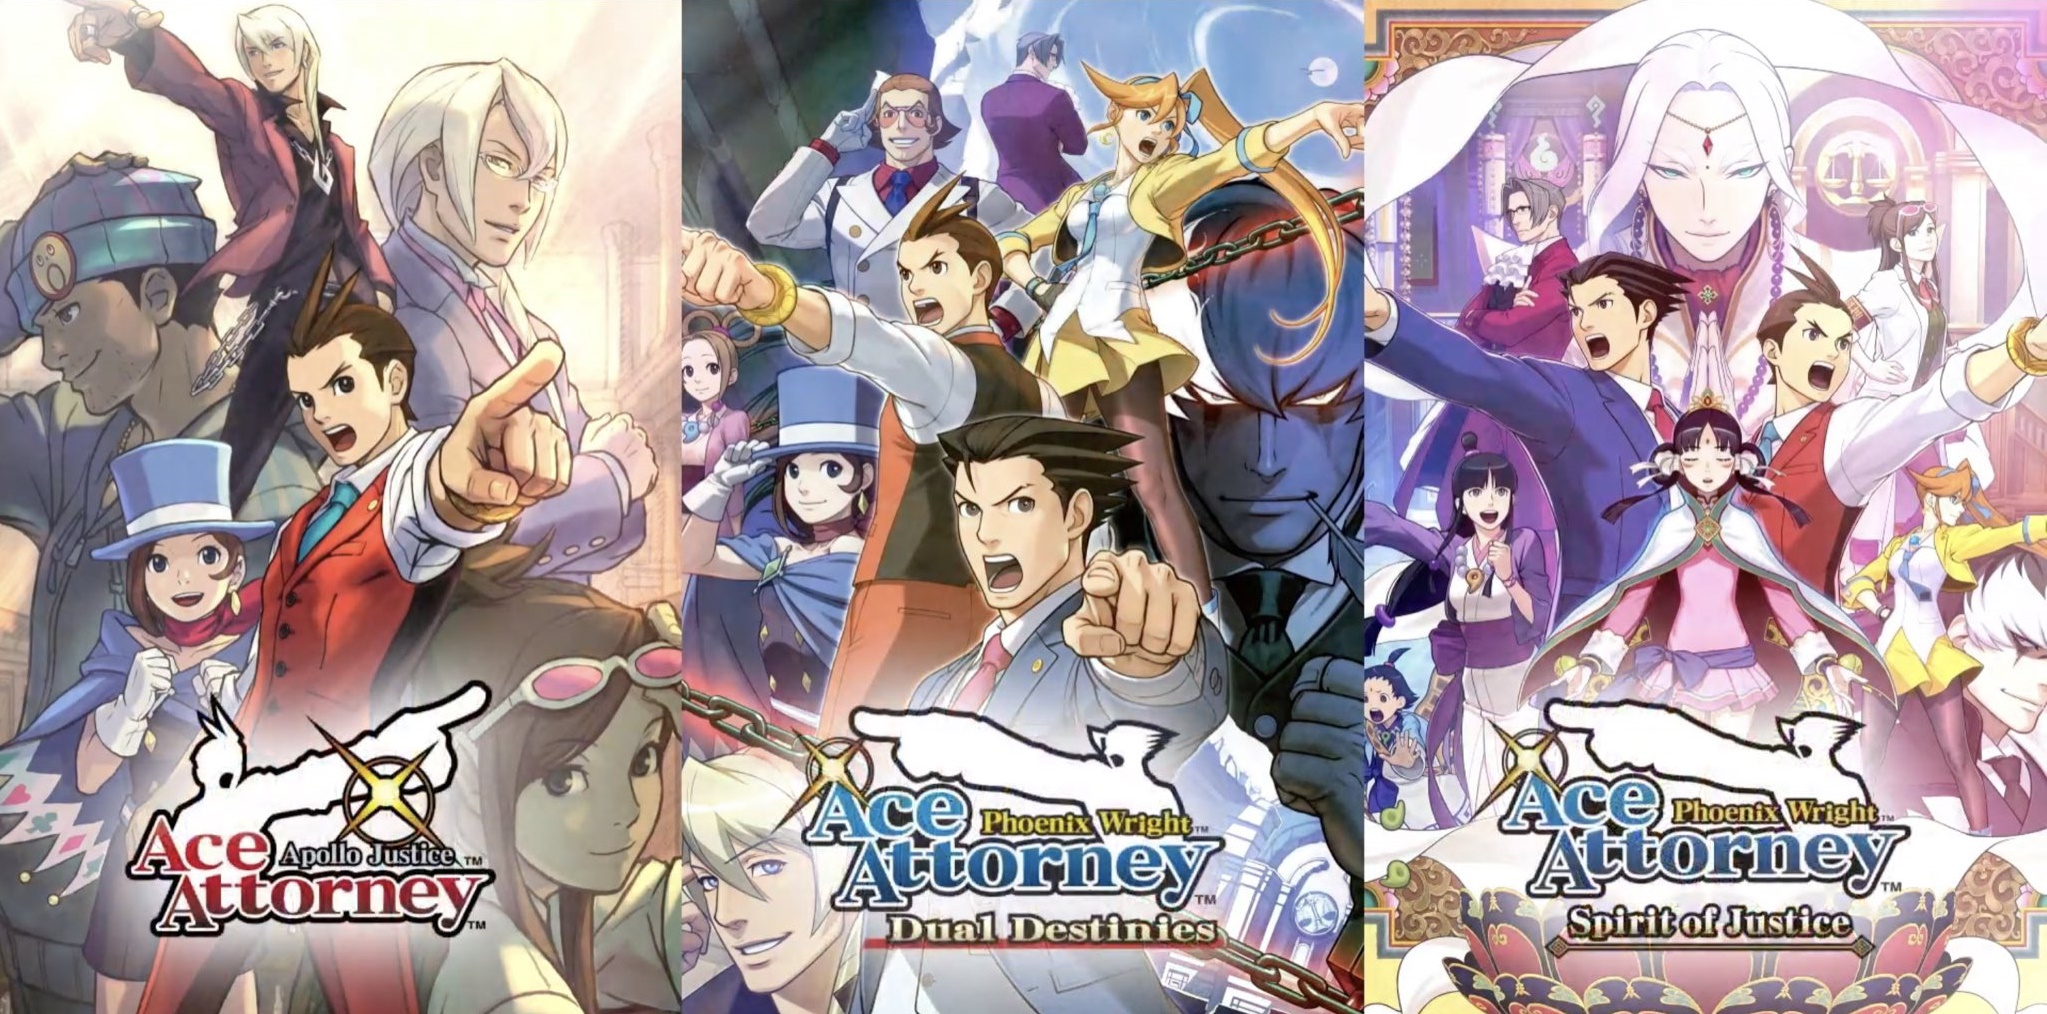 Apollo Justice: Ace Attorney is coming to iOS and Android this winter |  Eurogamer.net